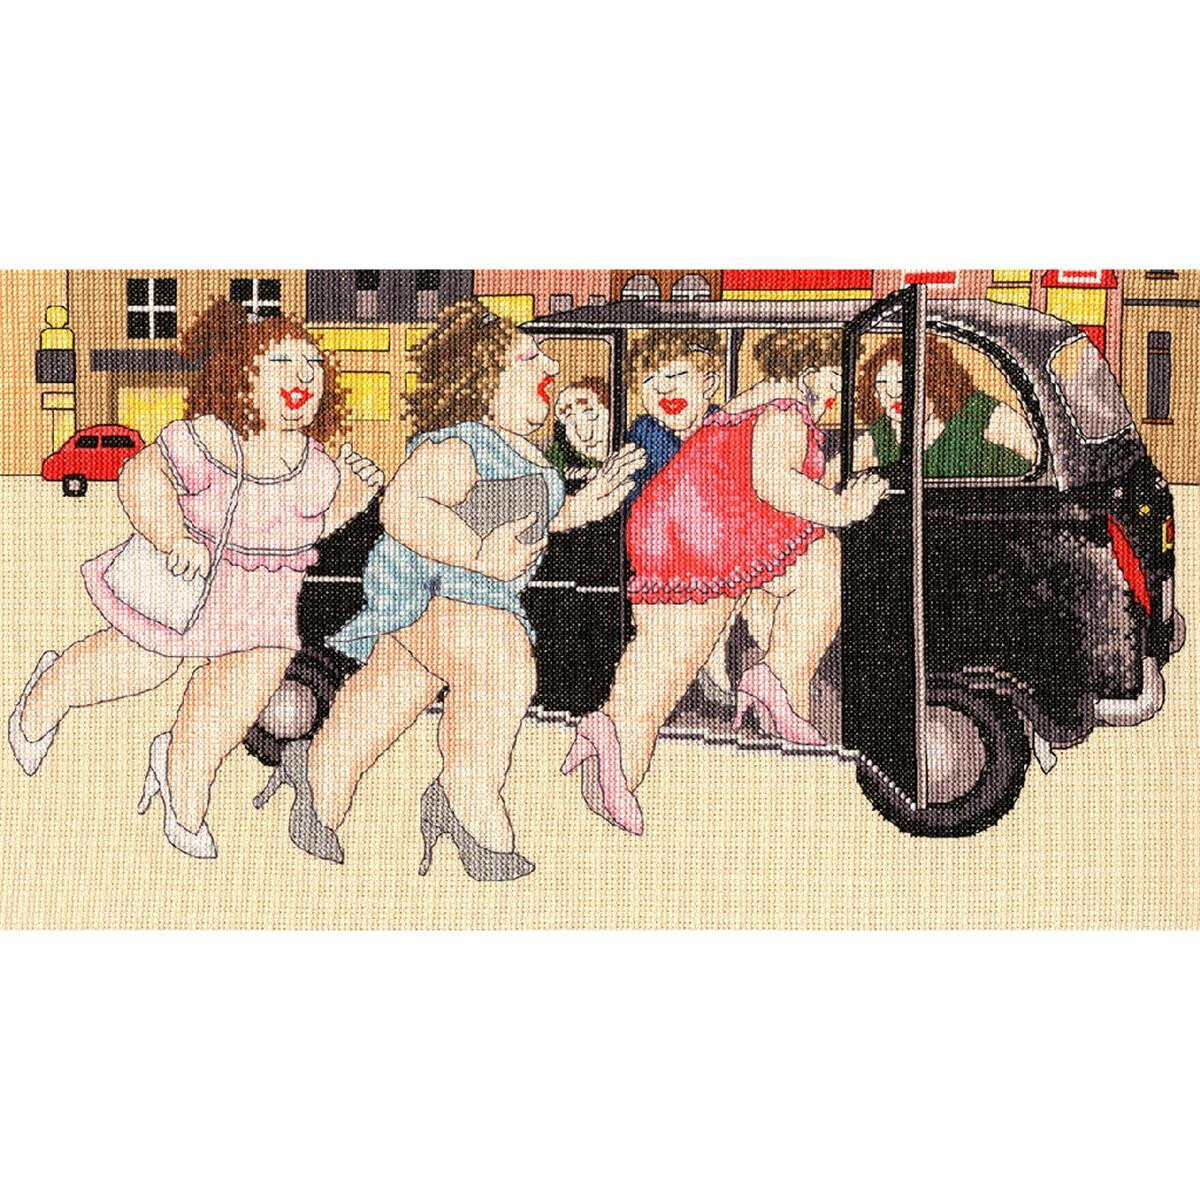 A whimsical illustration shows five curvy, stylish women...